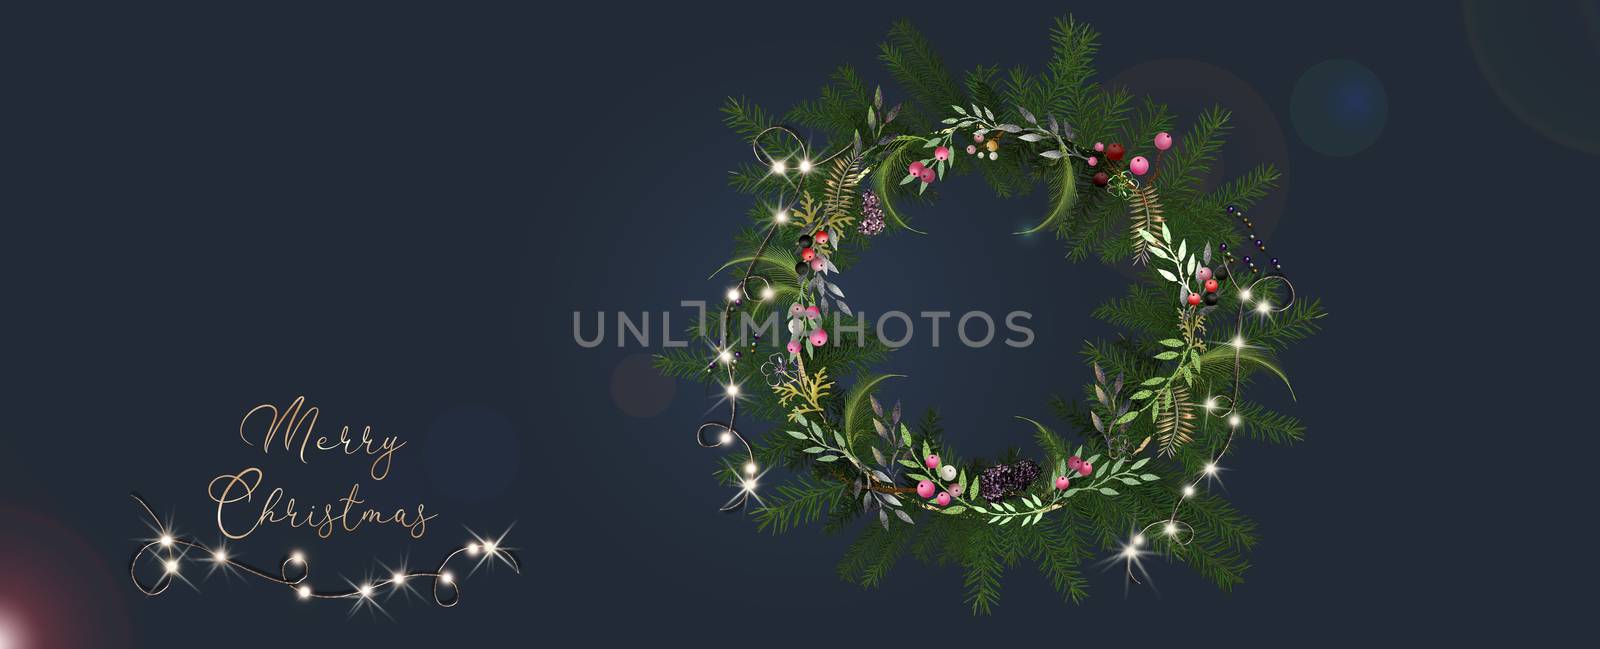 Christmas card design. Dark greeting 3D illustration of wreath with glowing garland lights. Horizontal poster. Text Merry Christmas.